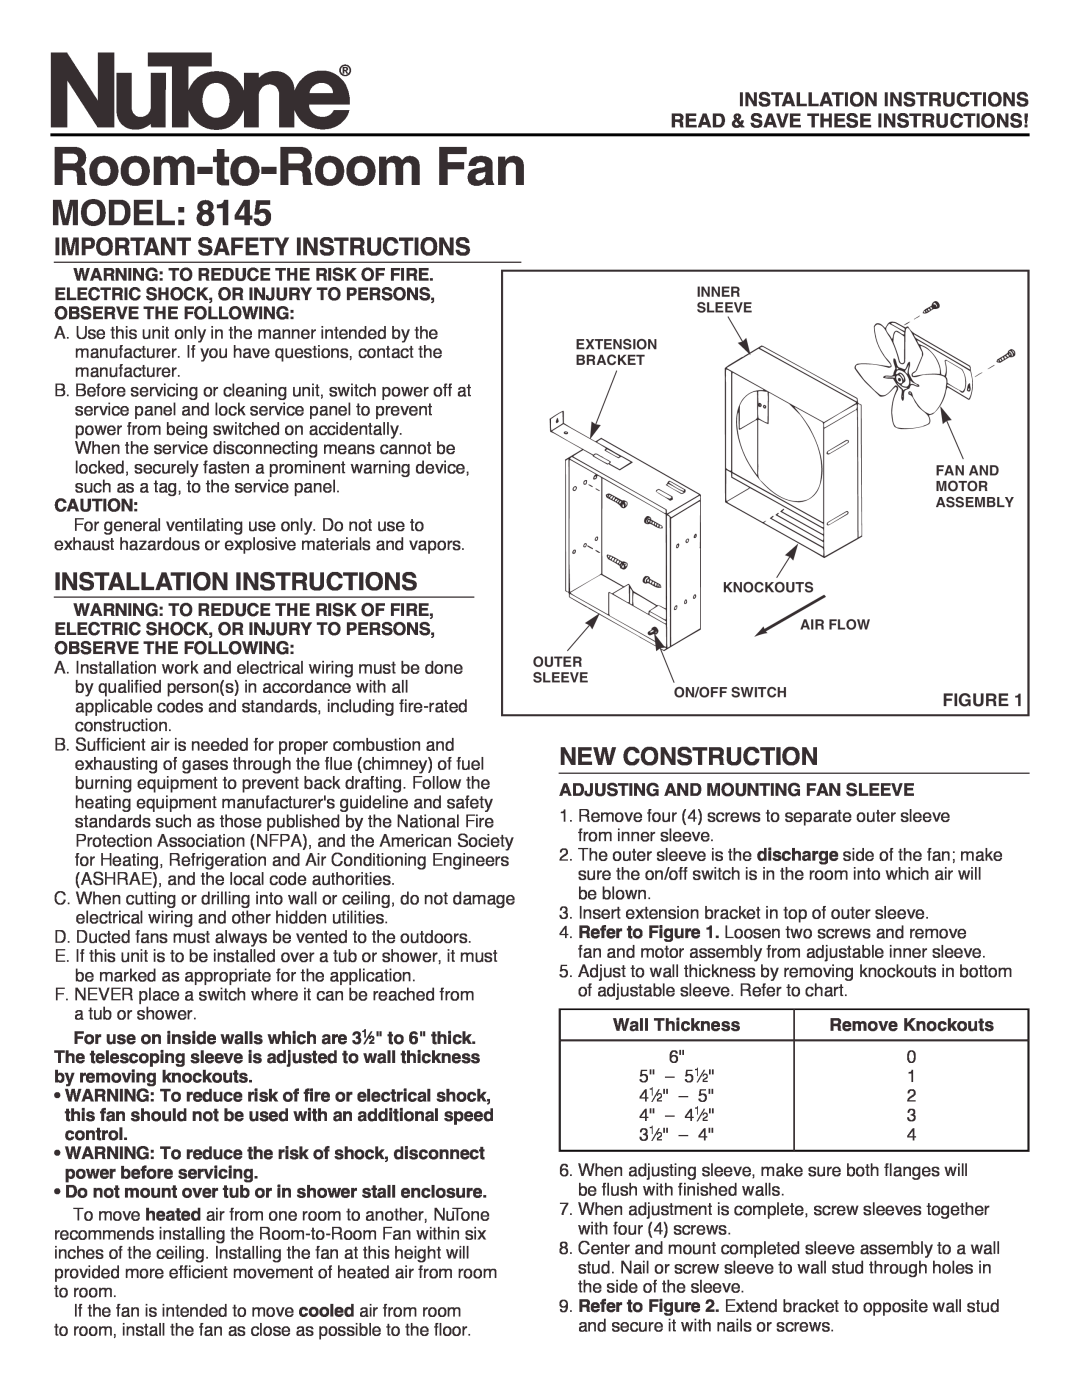 NuTone 8145 installation instructions Room-to-RoomFan, Model, Important Safety Instructions, Installation Instructions 